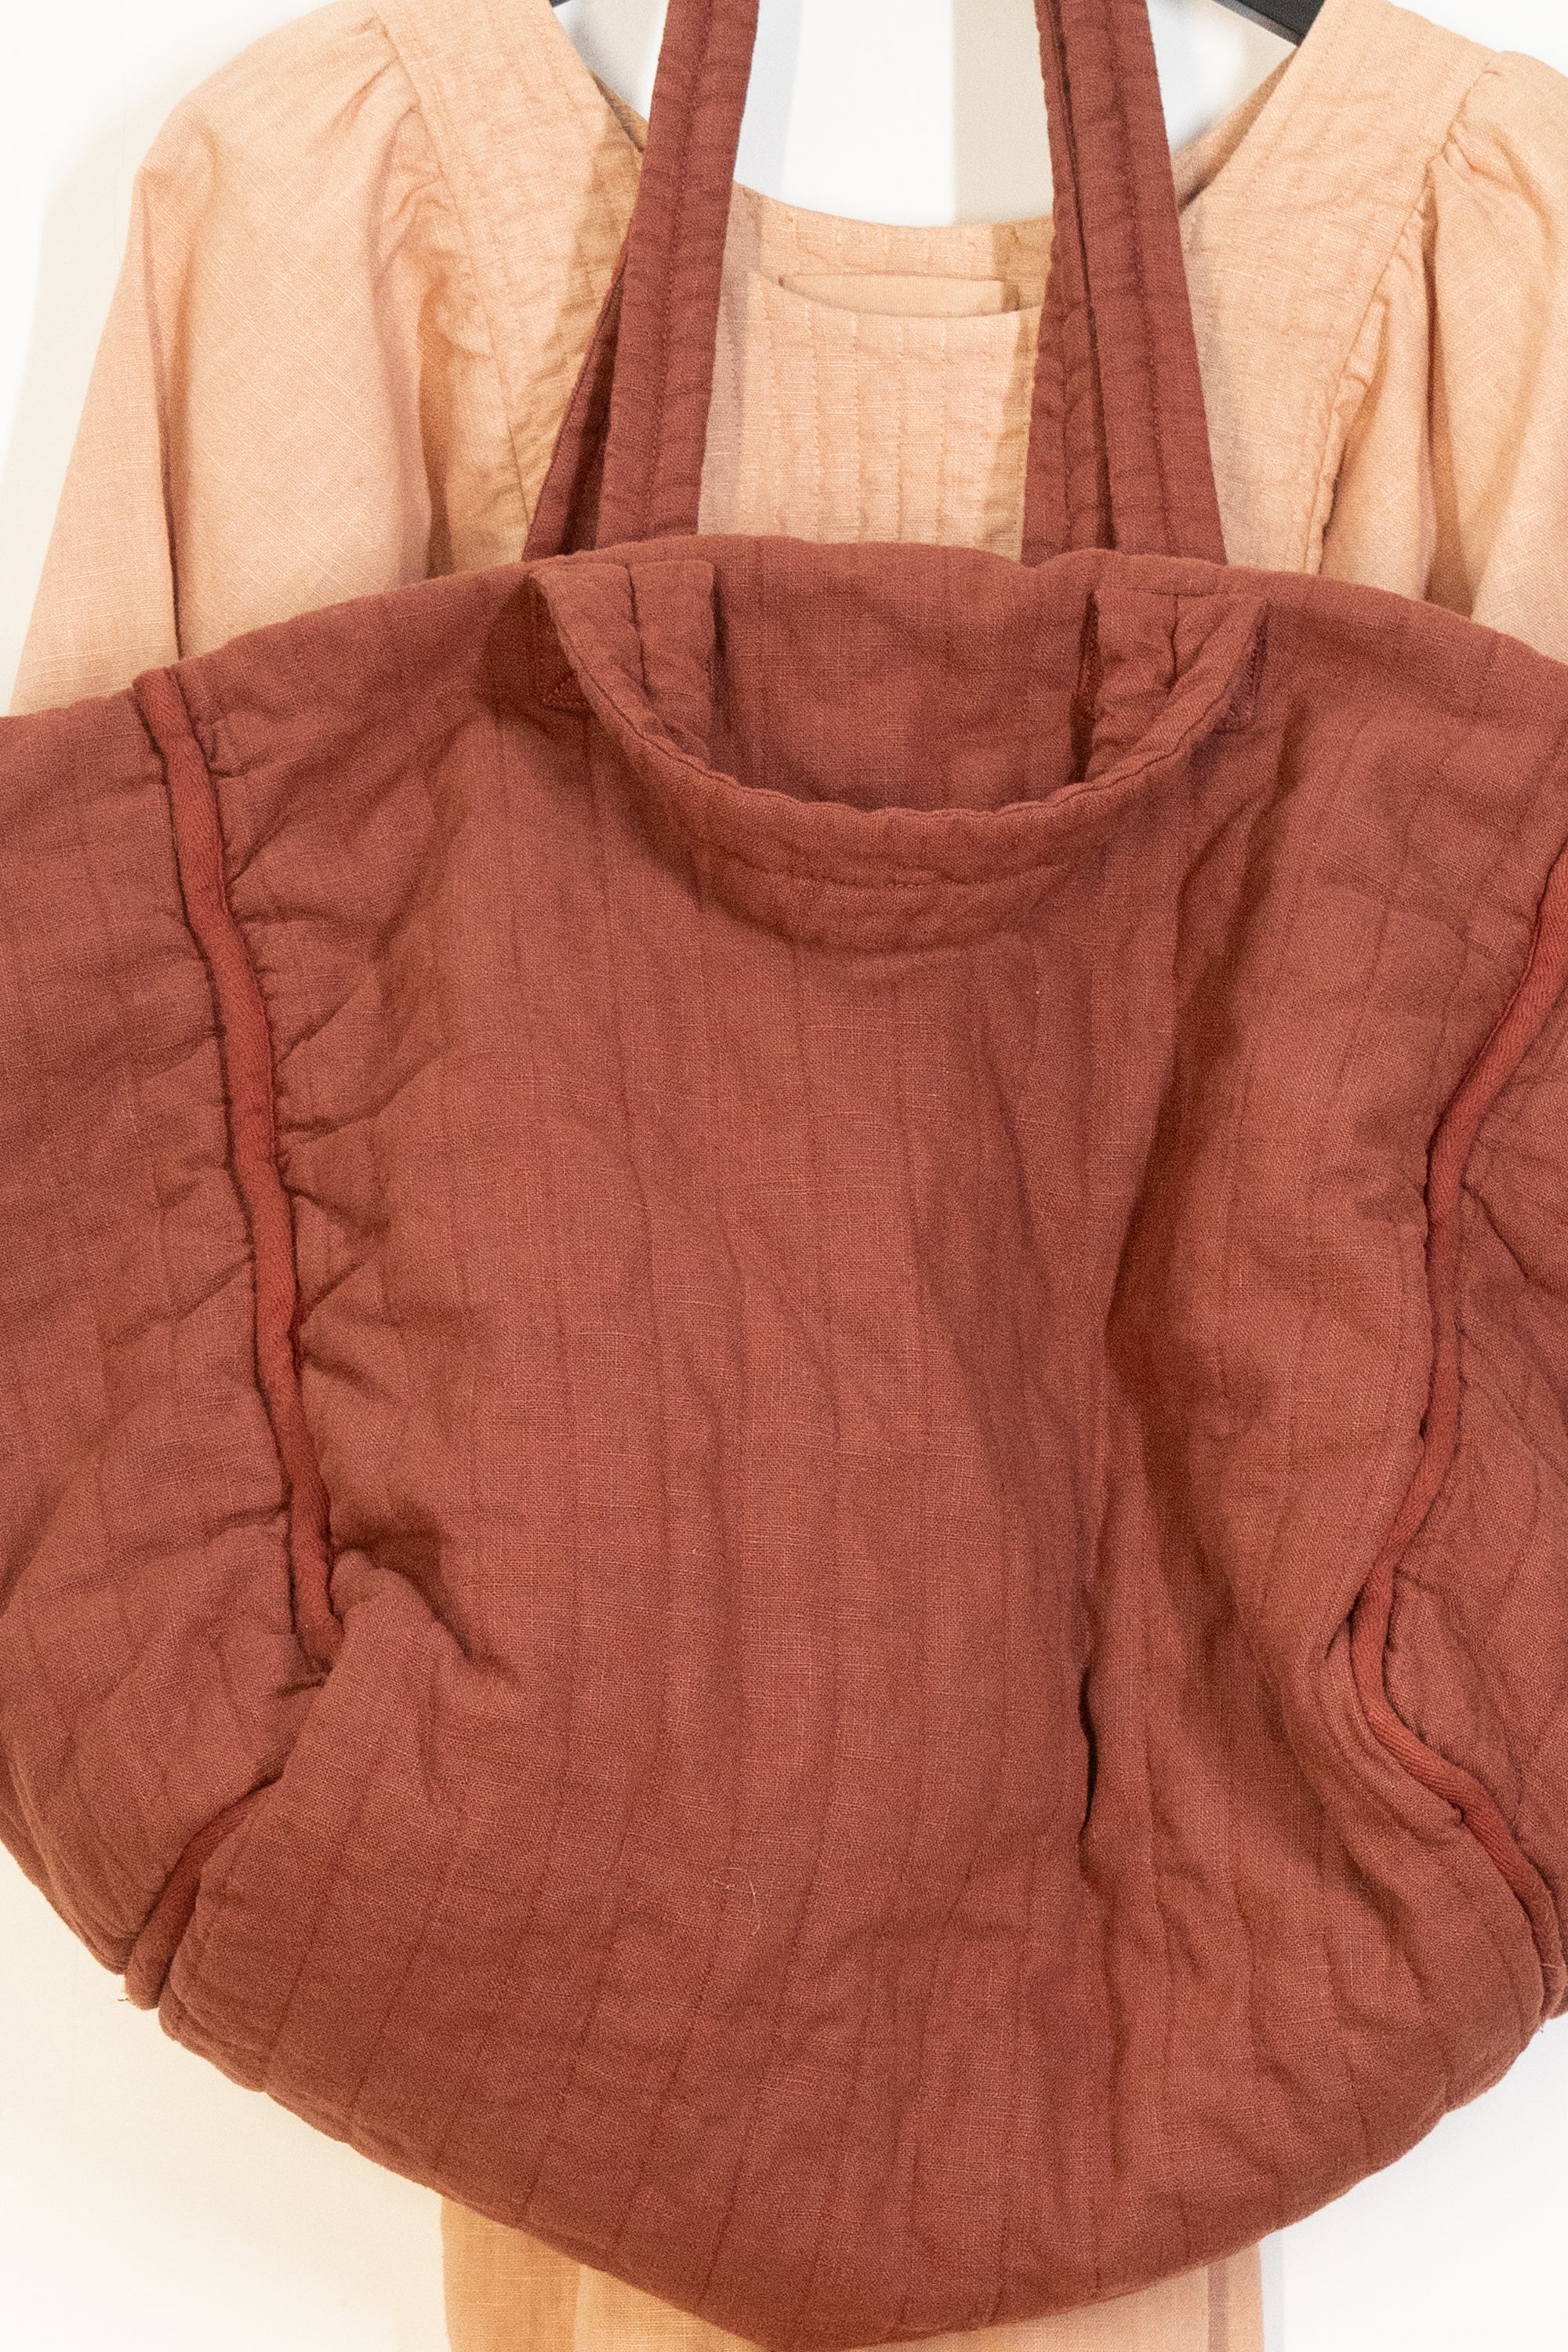 Quilt Tote - Rosewood Linen